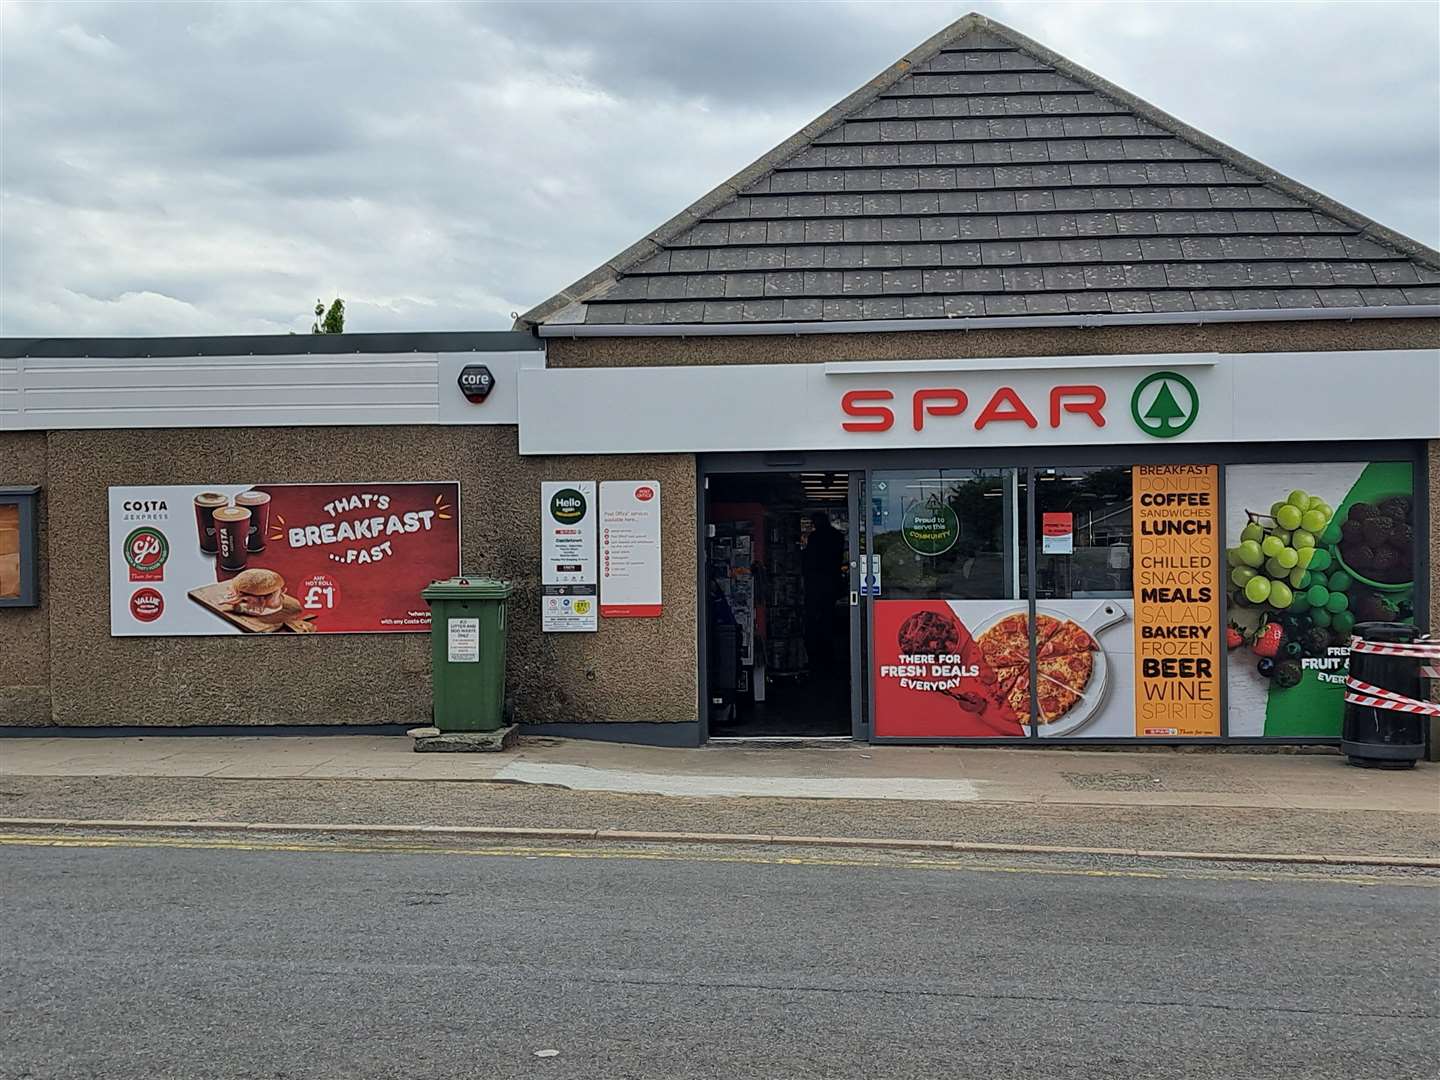 The re-opening of the SPAR shop in Castletown has been welcomed by the community council